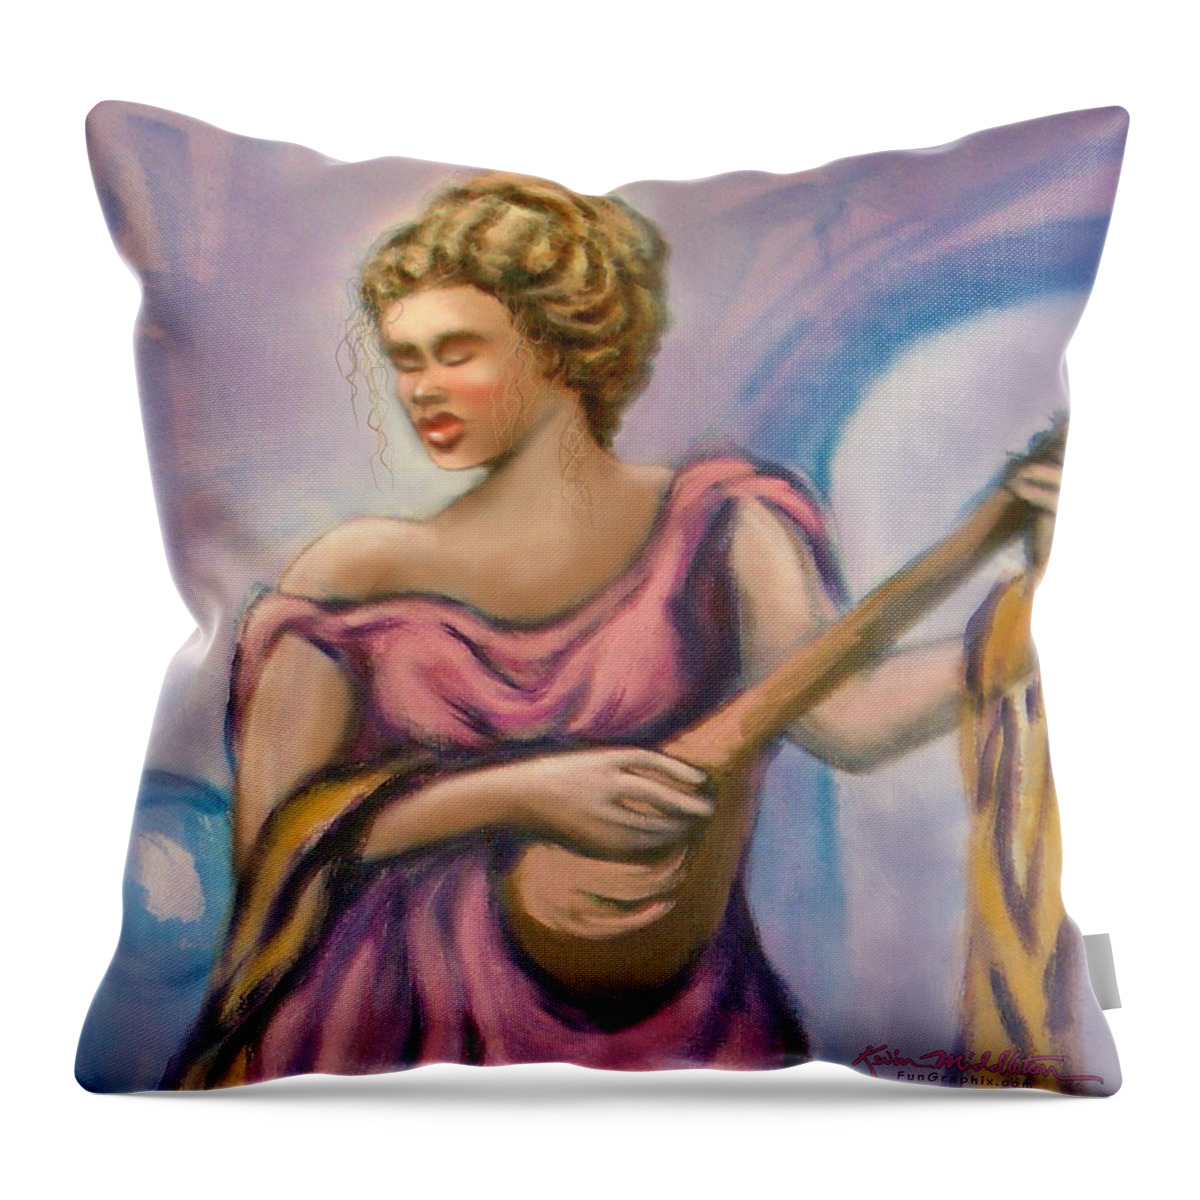 Lady Throw Pillow featuring the digital art Lady by Kevin Middleton